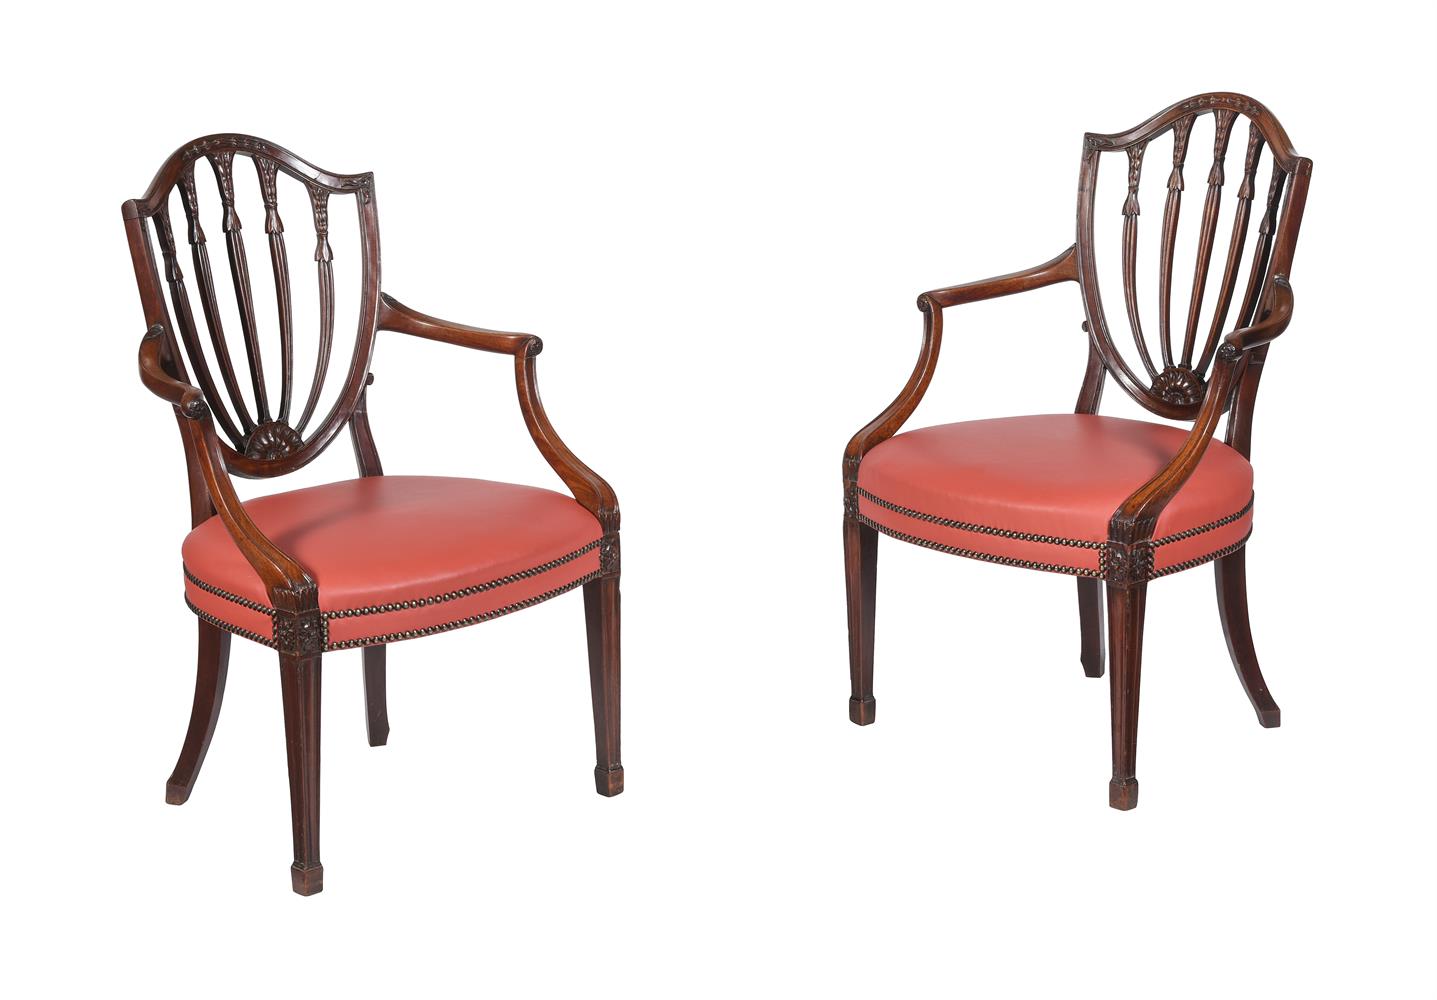 A PAIR OF GEORGE III MAHOGANY AND LEATHERETTE UPHOLSTERED ARMCHAIRS, CIRCA 1800